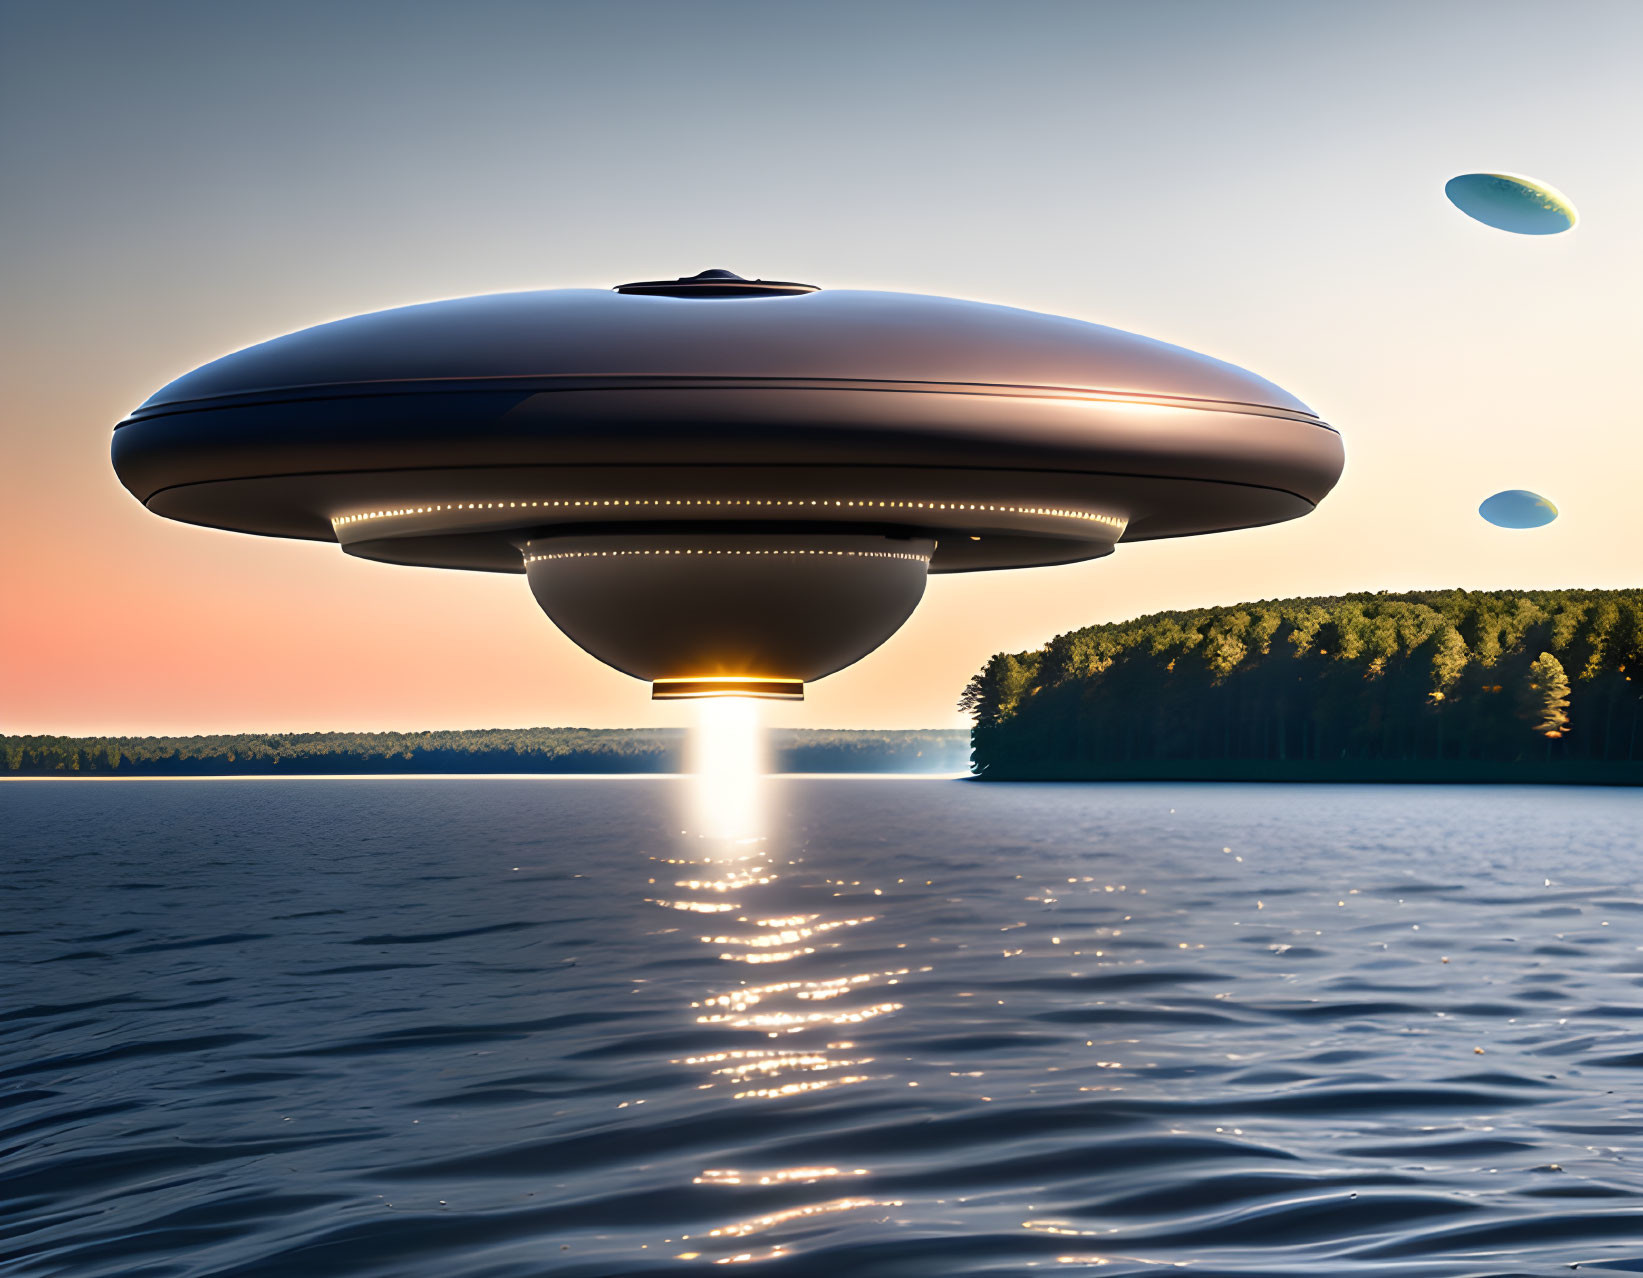 Unidentified Flying Object over serene lake at sunset